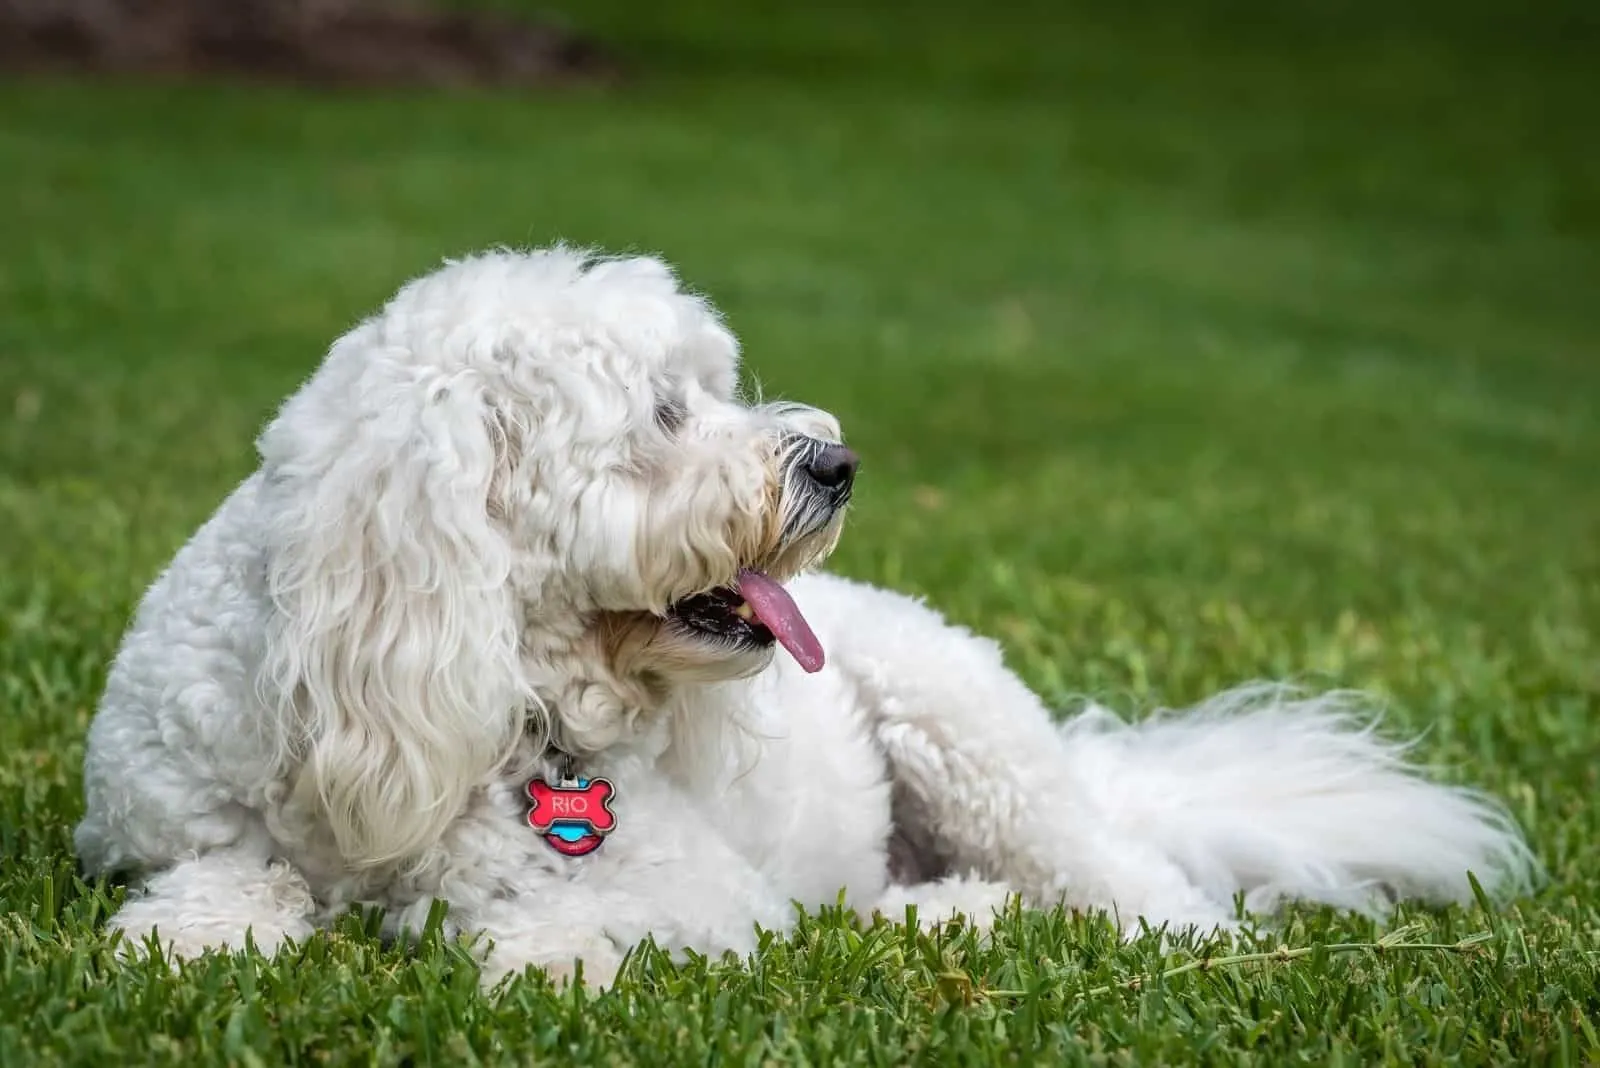 this is Rio the goldendoodle relaxing on the grass lawn